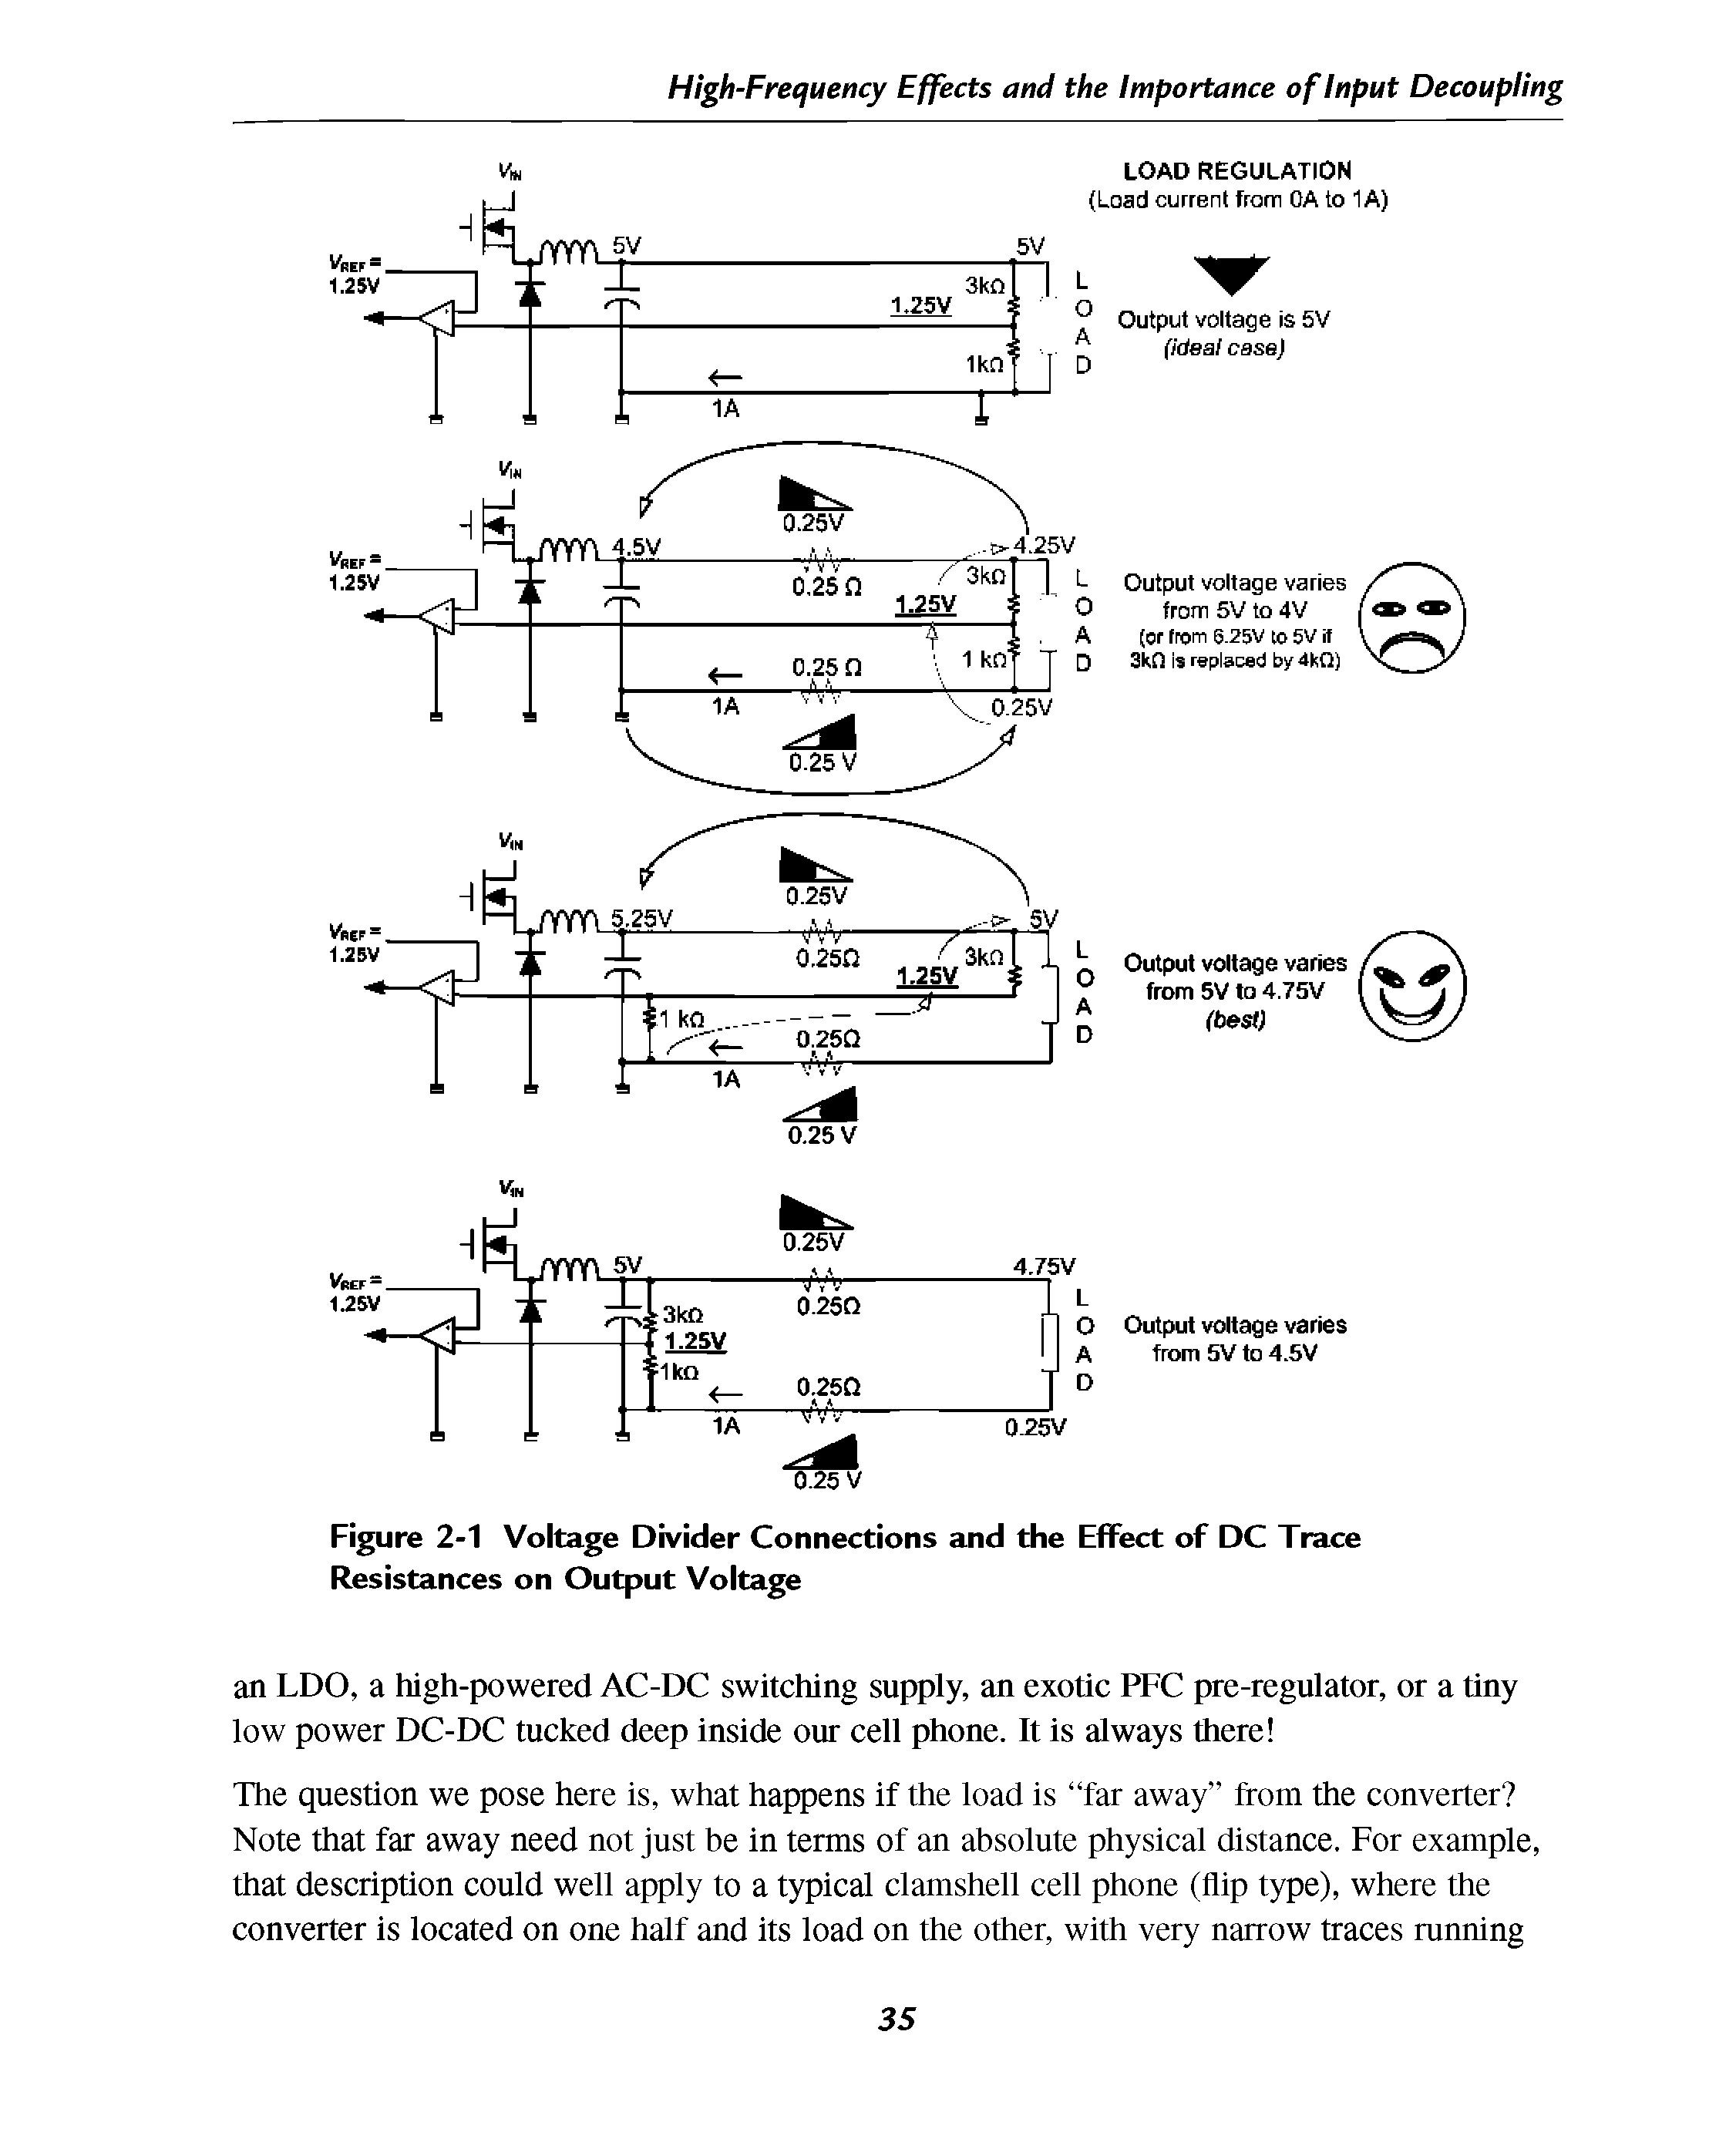 Figure 2-1 Voltage Divider Connections and the Effect of DC Trace Resistances on Output Voltage...